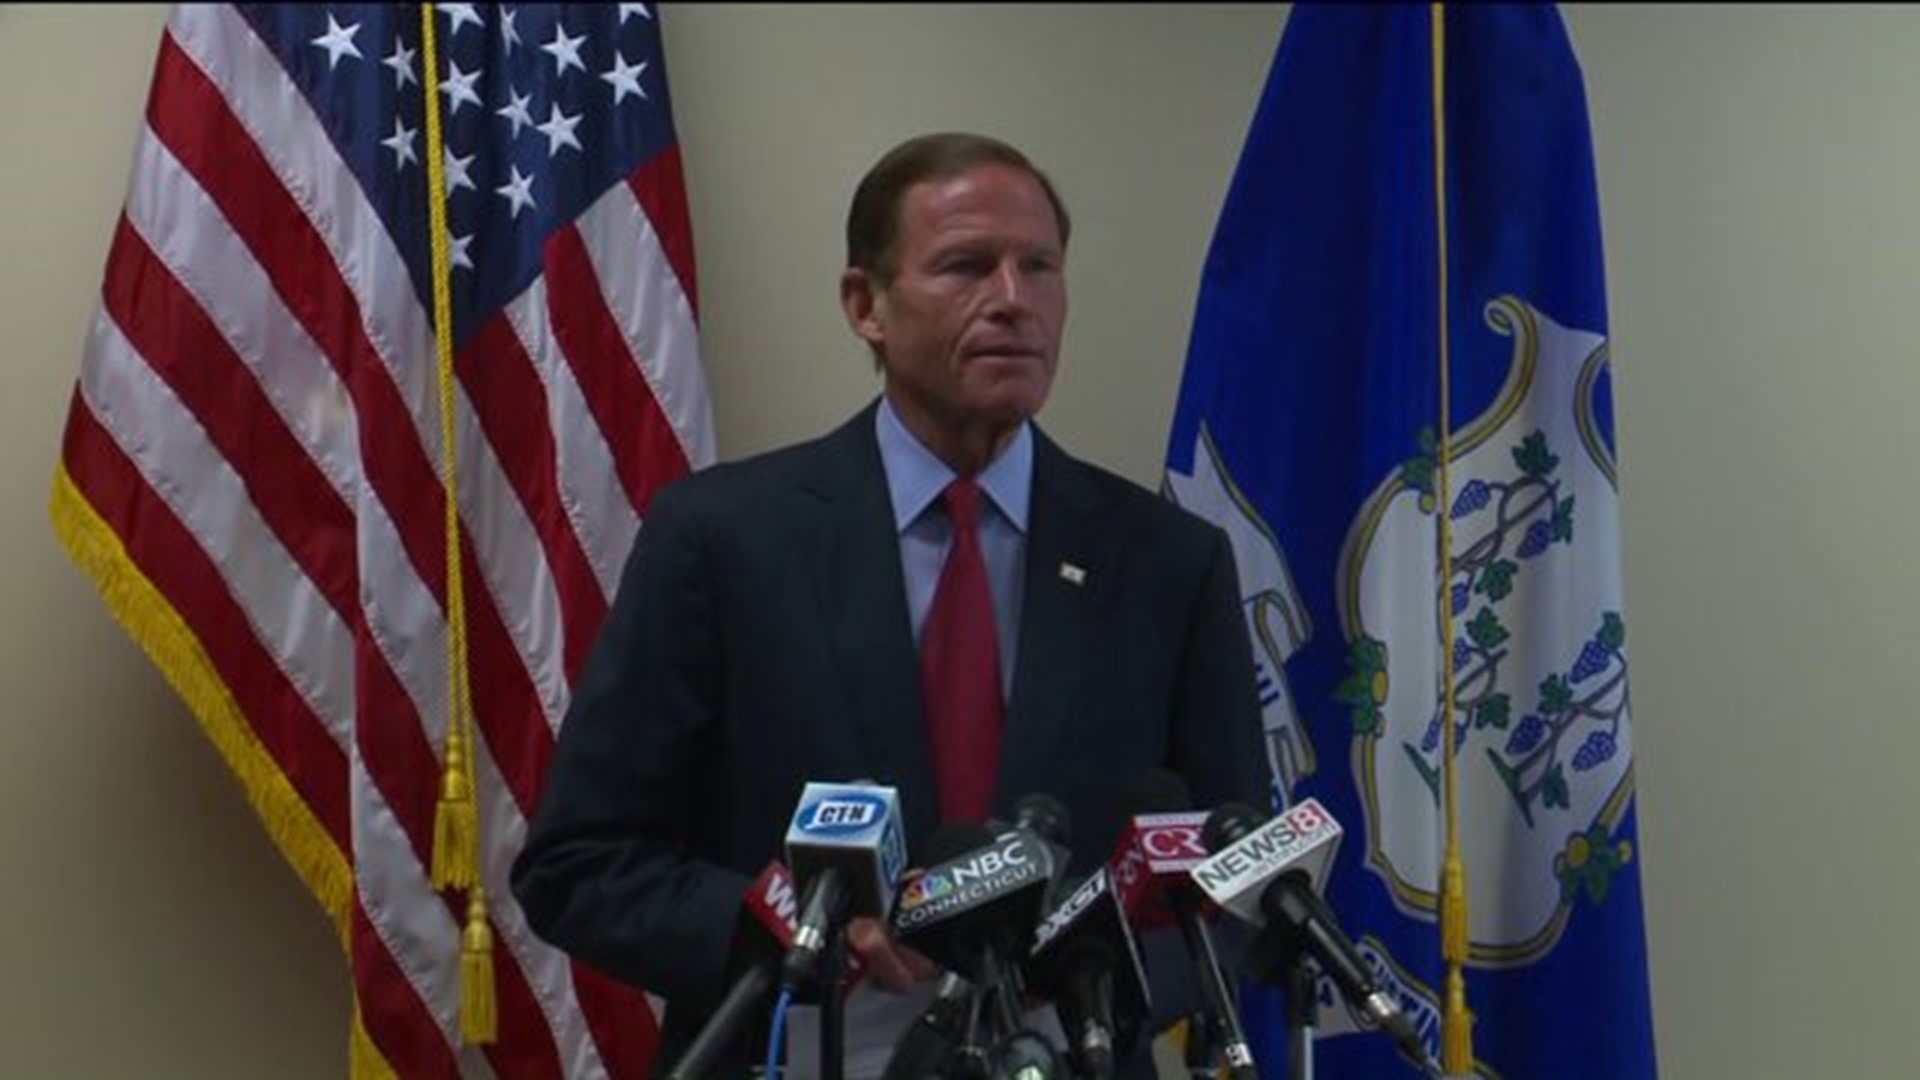 Sen. Blumenthal announces his support of Iran nuclear deal